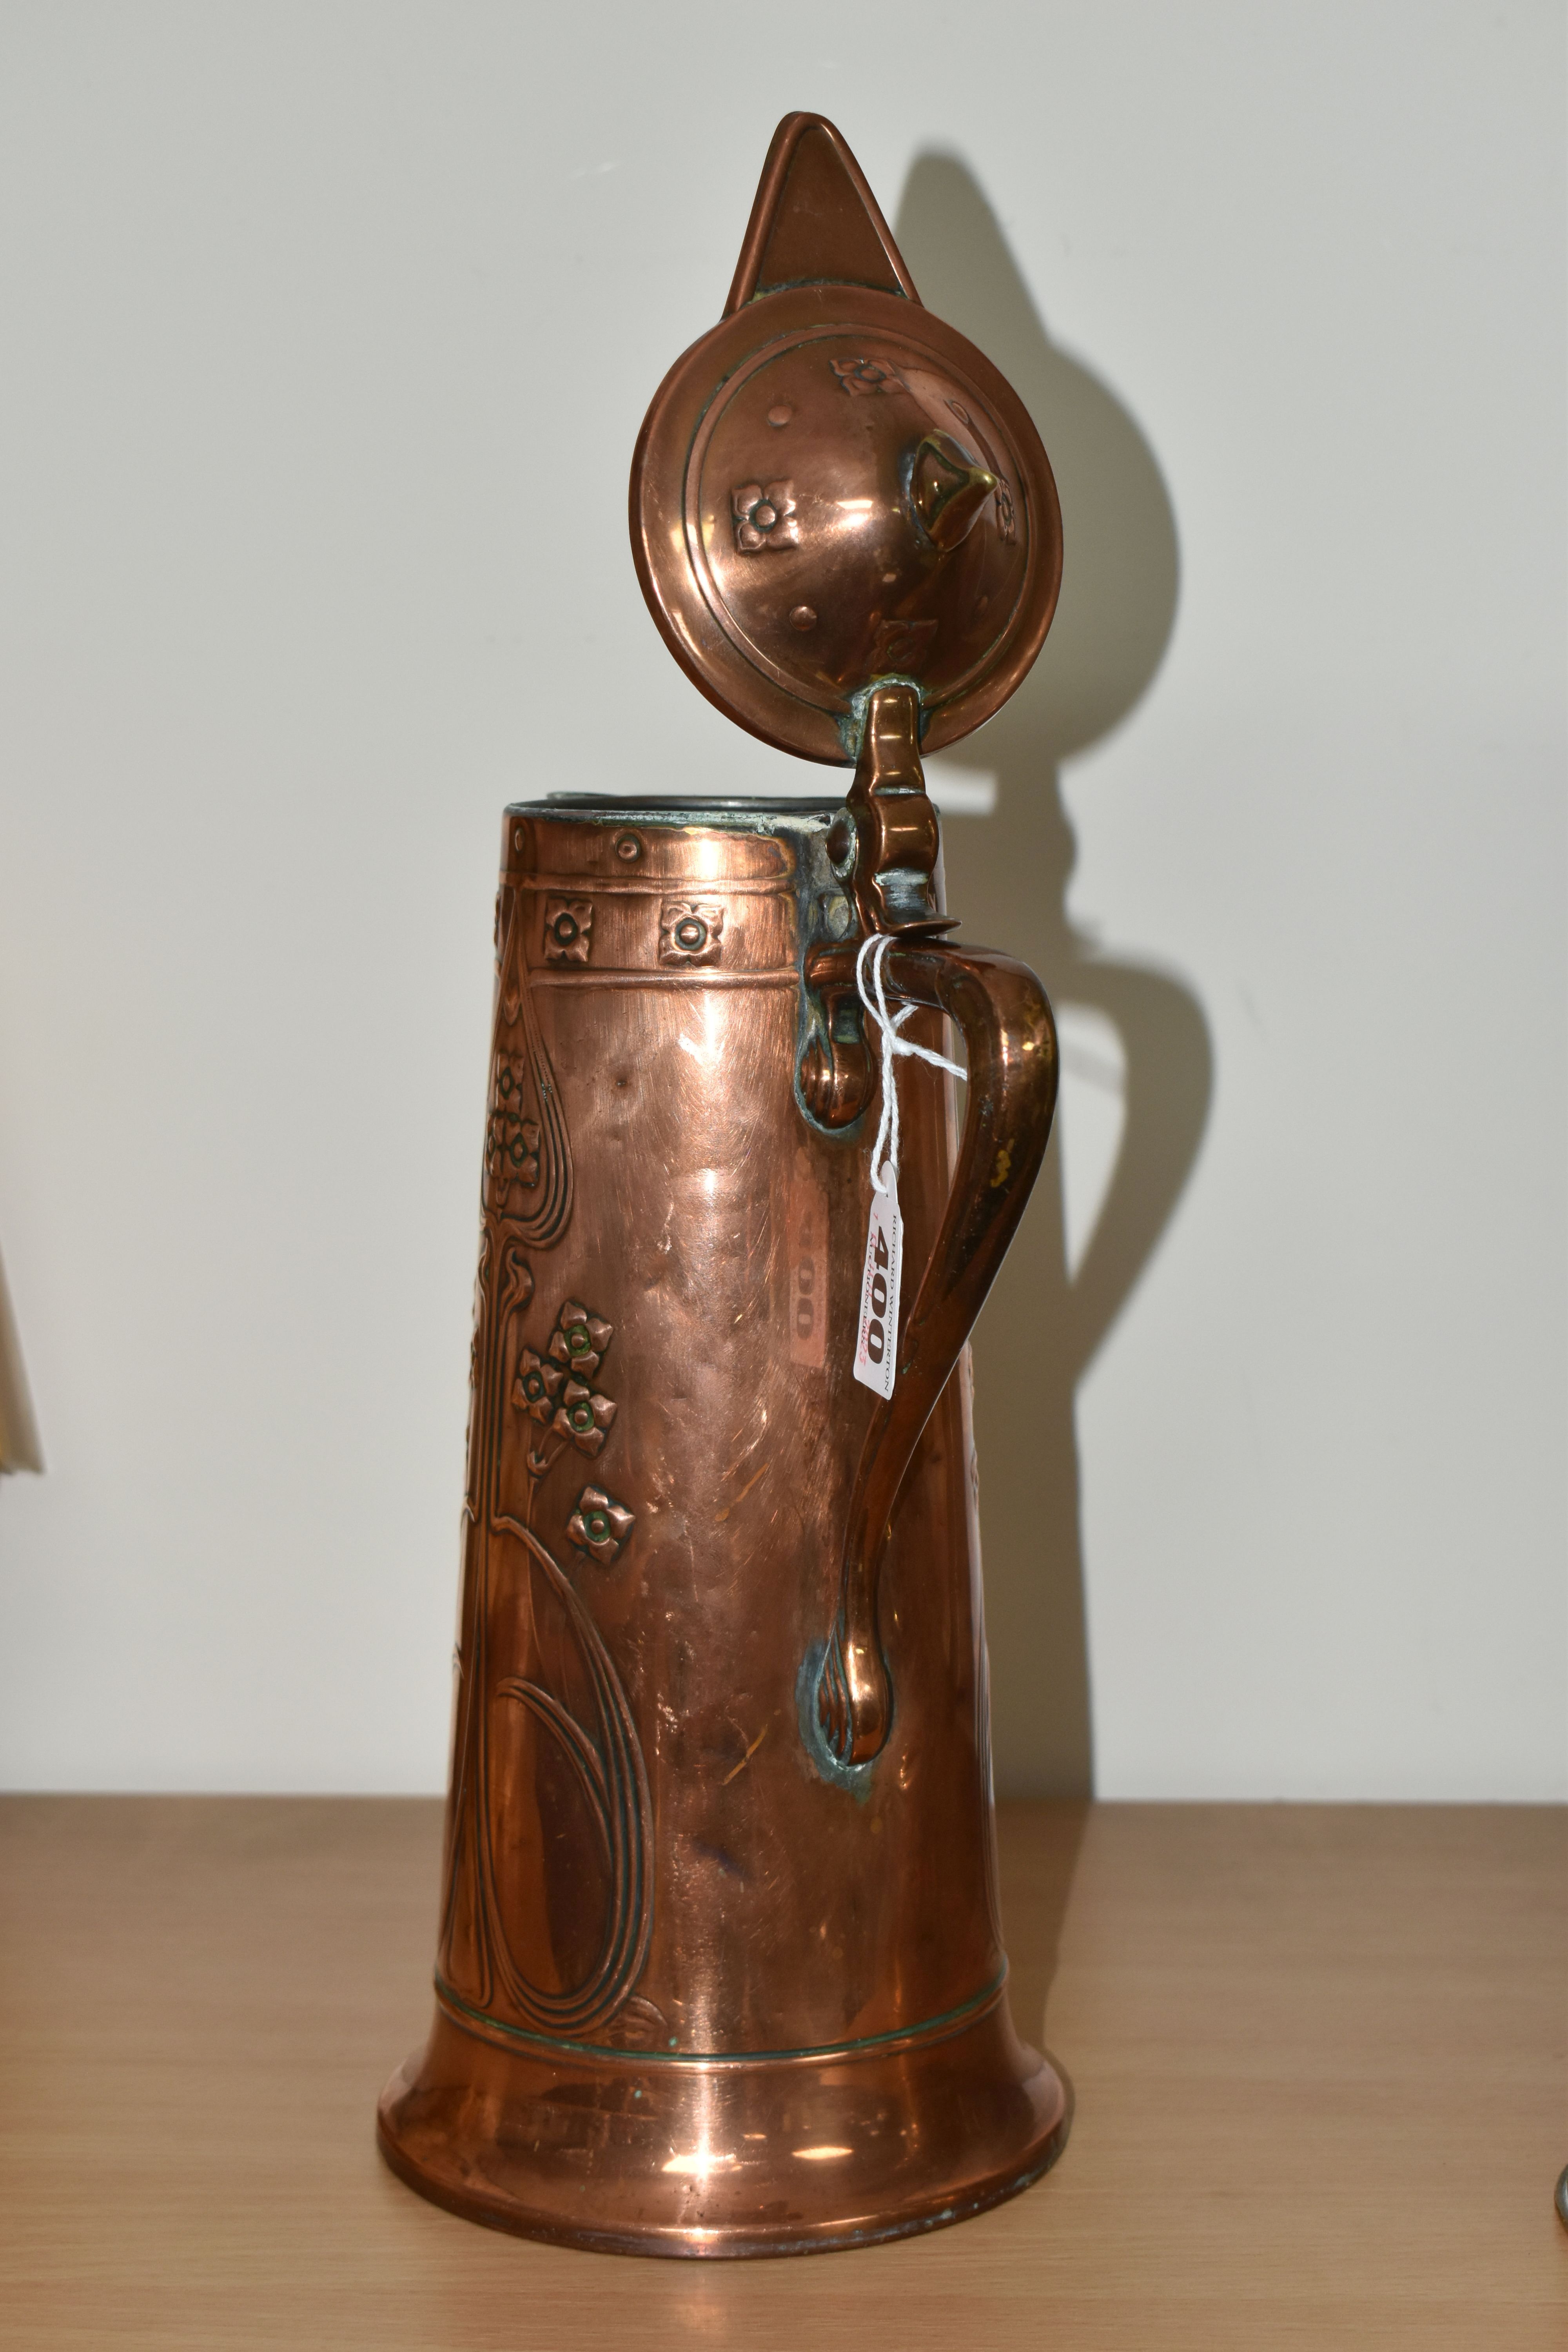 AN ART NOUVEAU COPPER JUG BY JOSEPH SANKEY & SONS, of covered tapering form, with stylised Art - Image 4 of 5